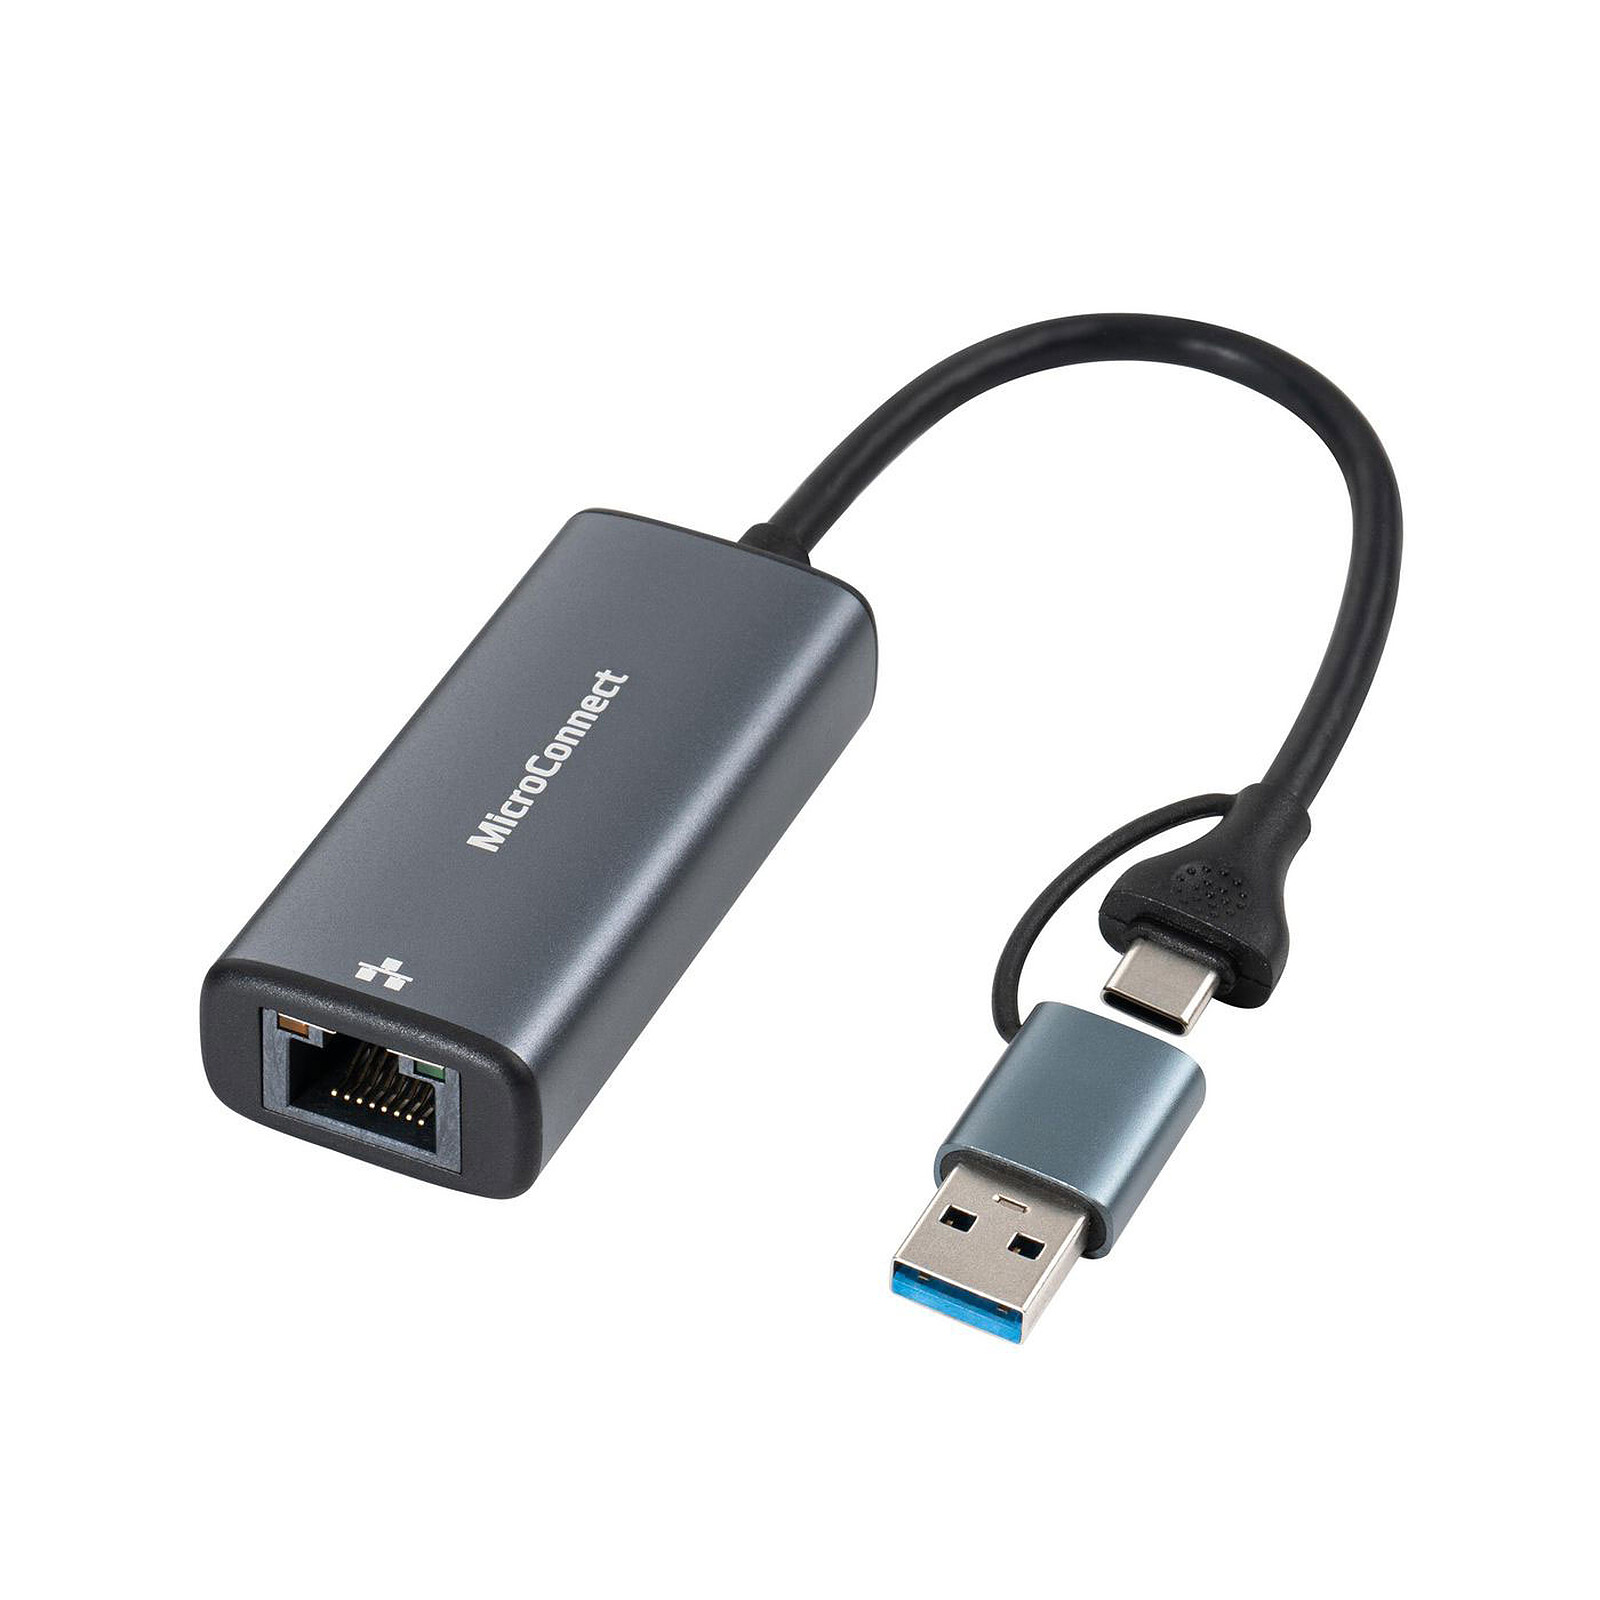 MicroConnect Thunderbolt 3 Cable 1m